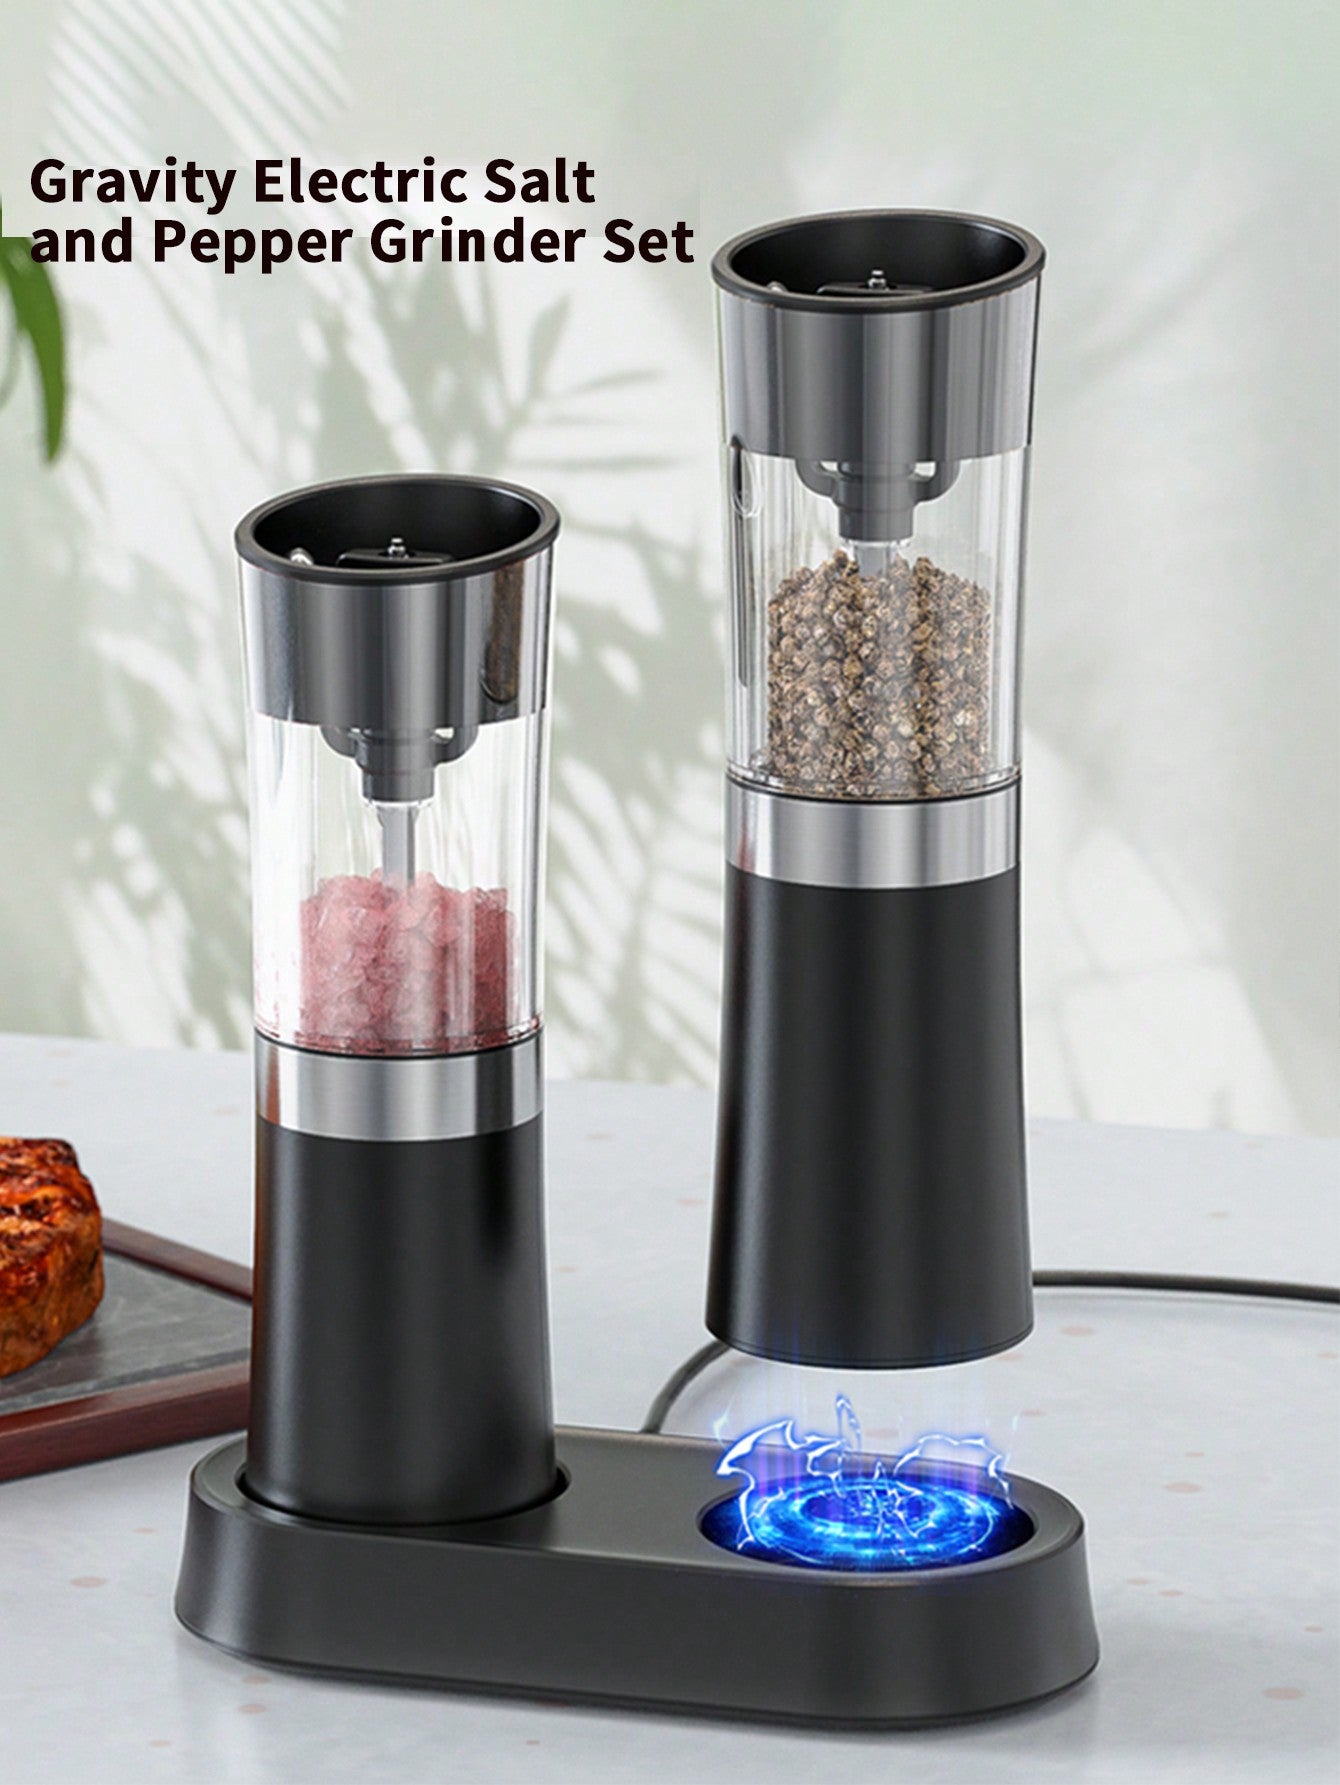 [Upgraded Larger Capacity] Gravity Electric Salt And Pepper Grinder Set - USB Rechargeable With Dual Charging Base - Automatic One Hand Operation - Adjustable Coarseness & LED Light ,Refillabl,Electric Gravity Salt And Pepper Grinder Set Of 2,-Black-2